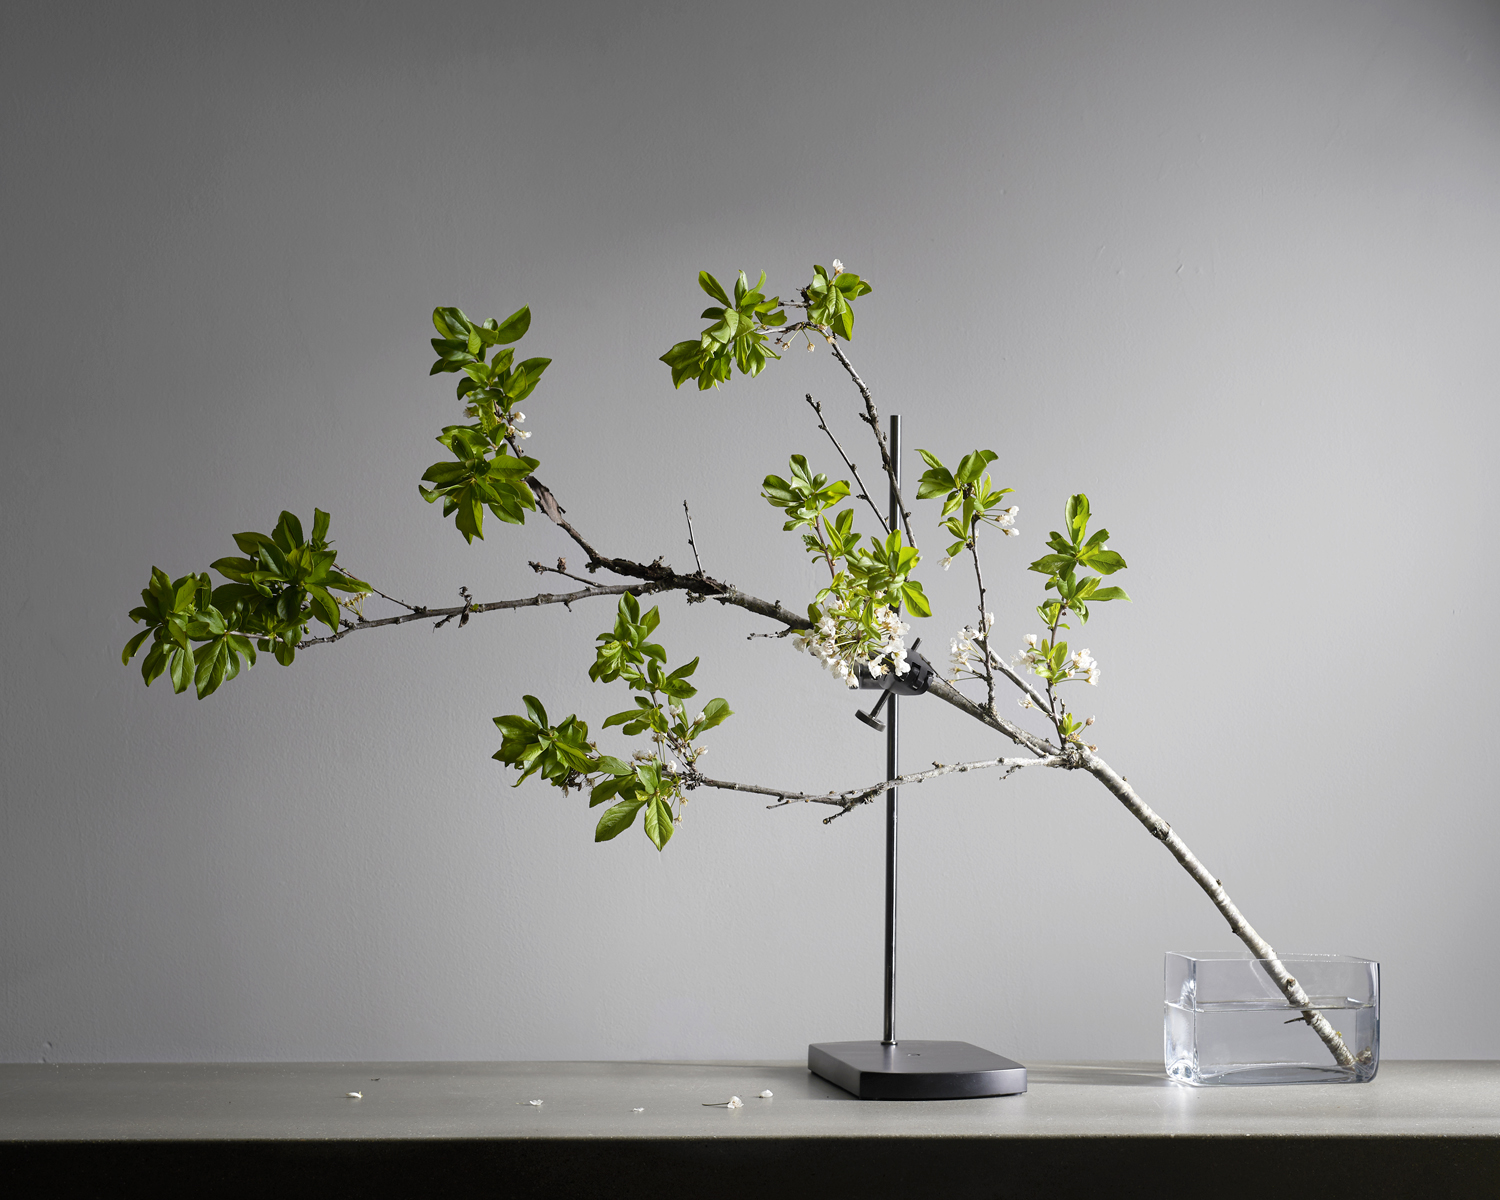 14 Decorative Branches to Shop for (and Arrange!) by Season